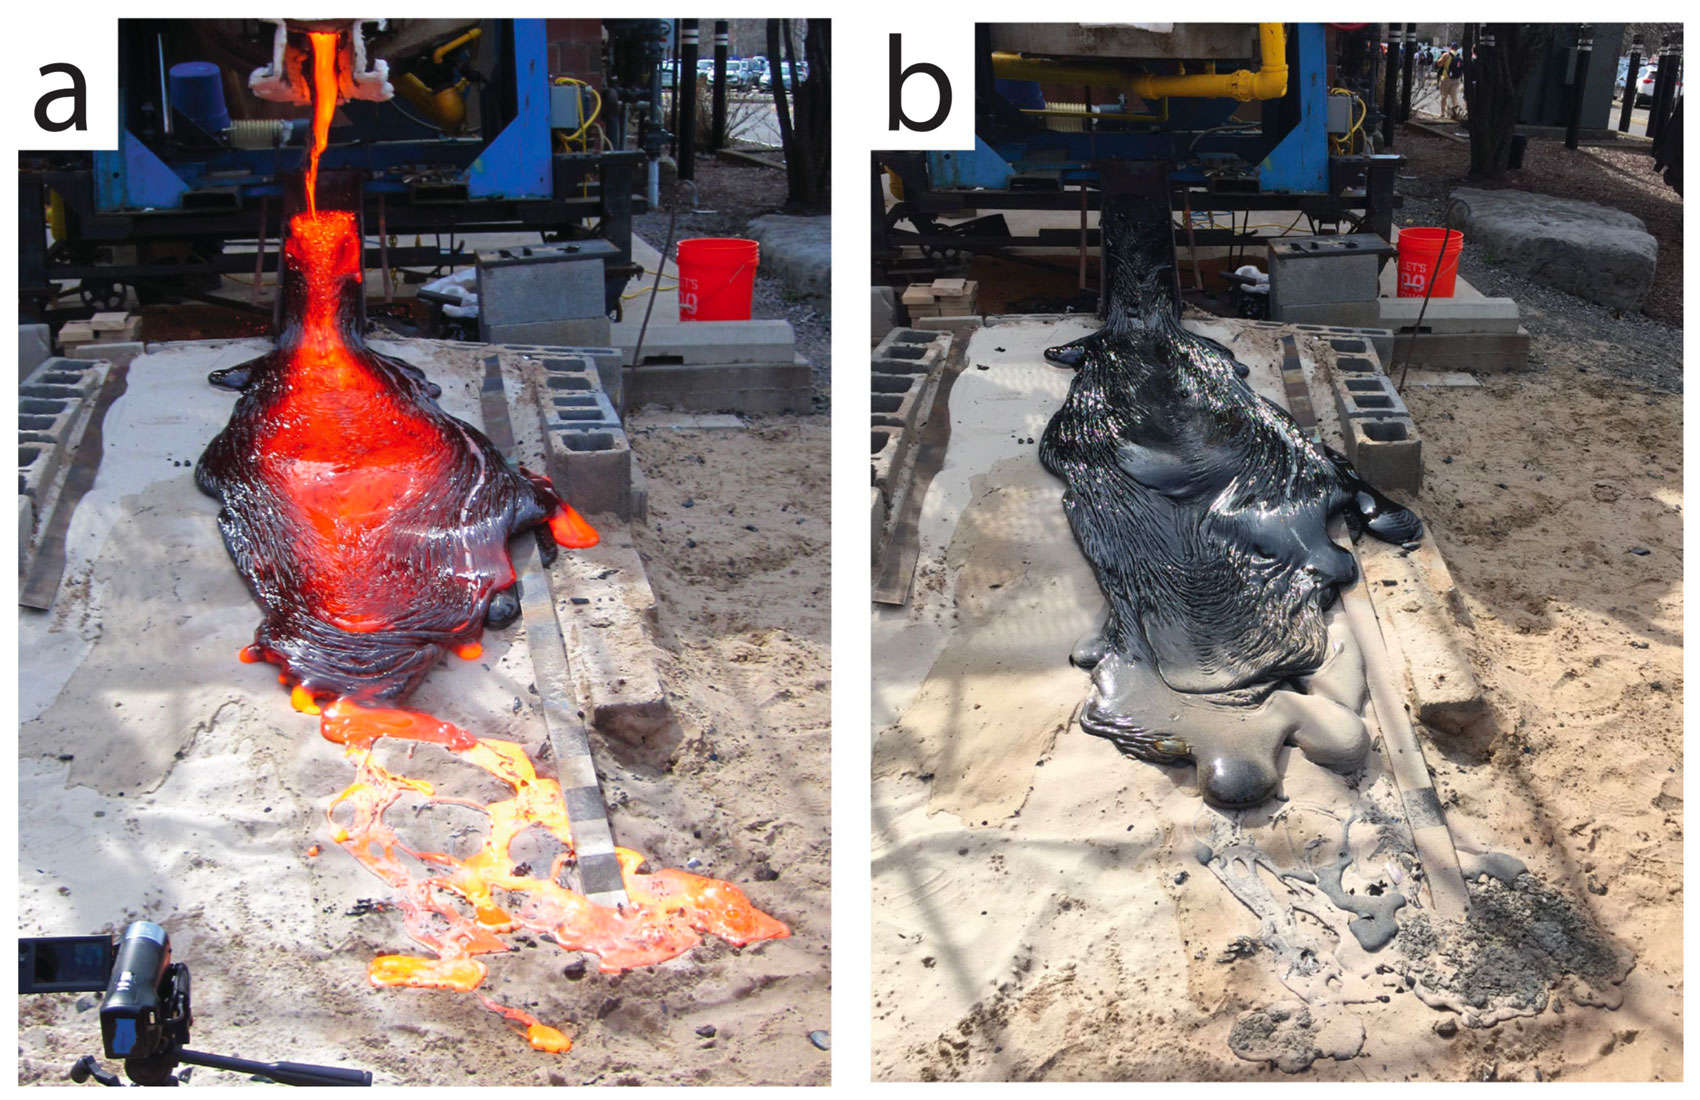 During a lava flow experiment (left), molten metal (at the bottom) breaks out from under a thicker, more rocky silicate flow, forming tendrils. After cooling (right) the silicate flow is glassy and black while the metal flow is grayer.